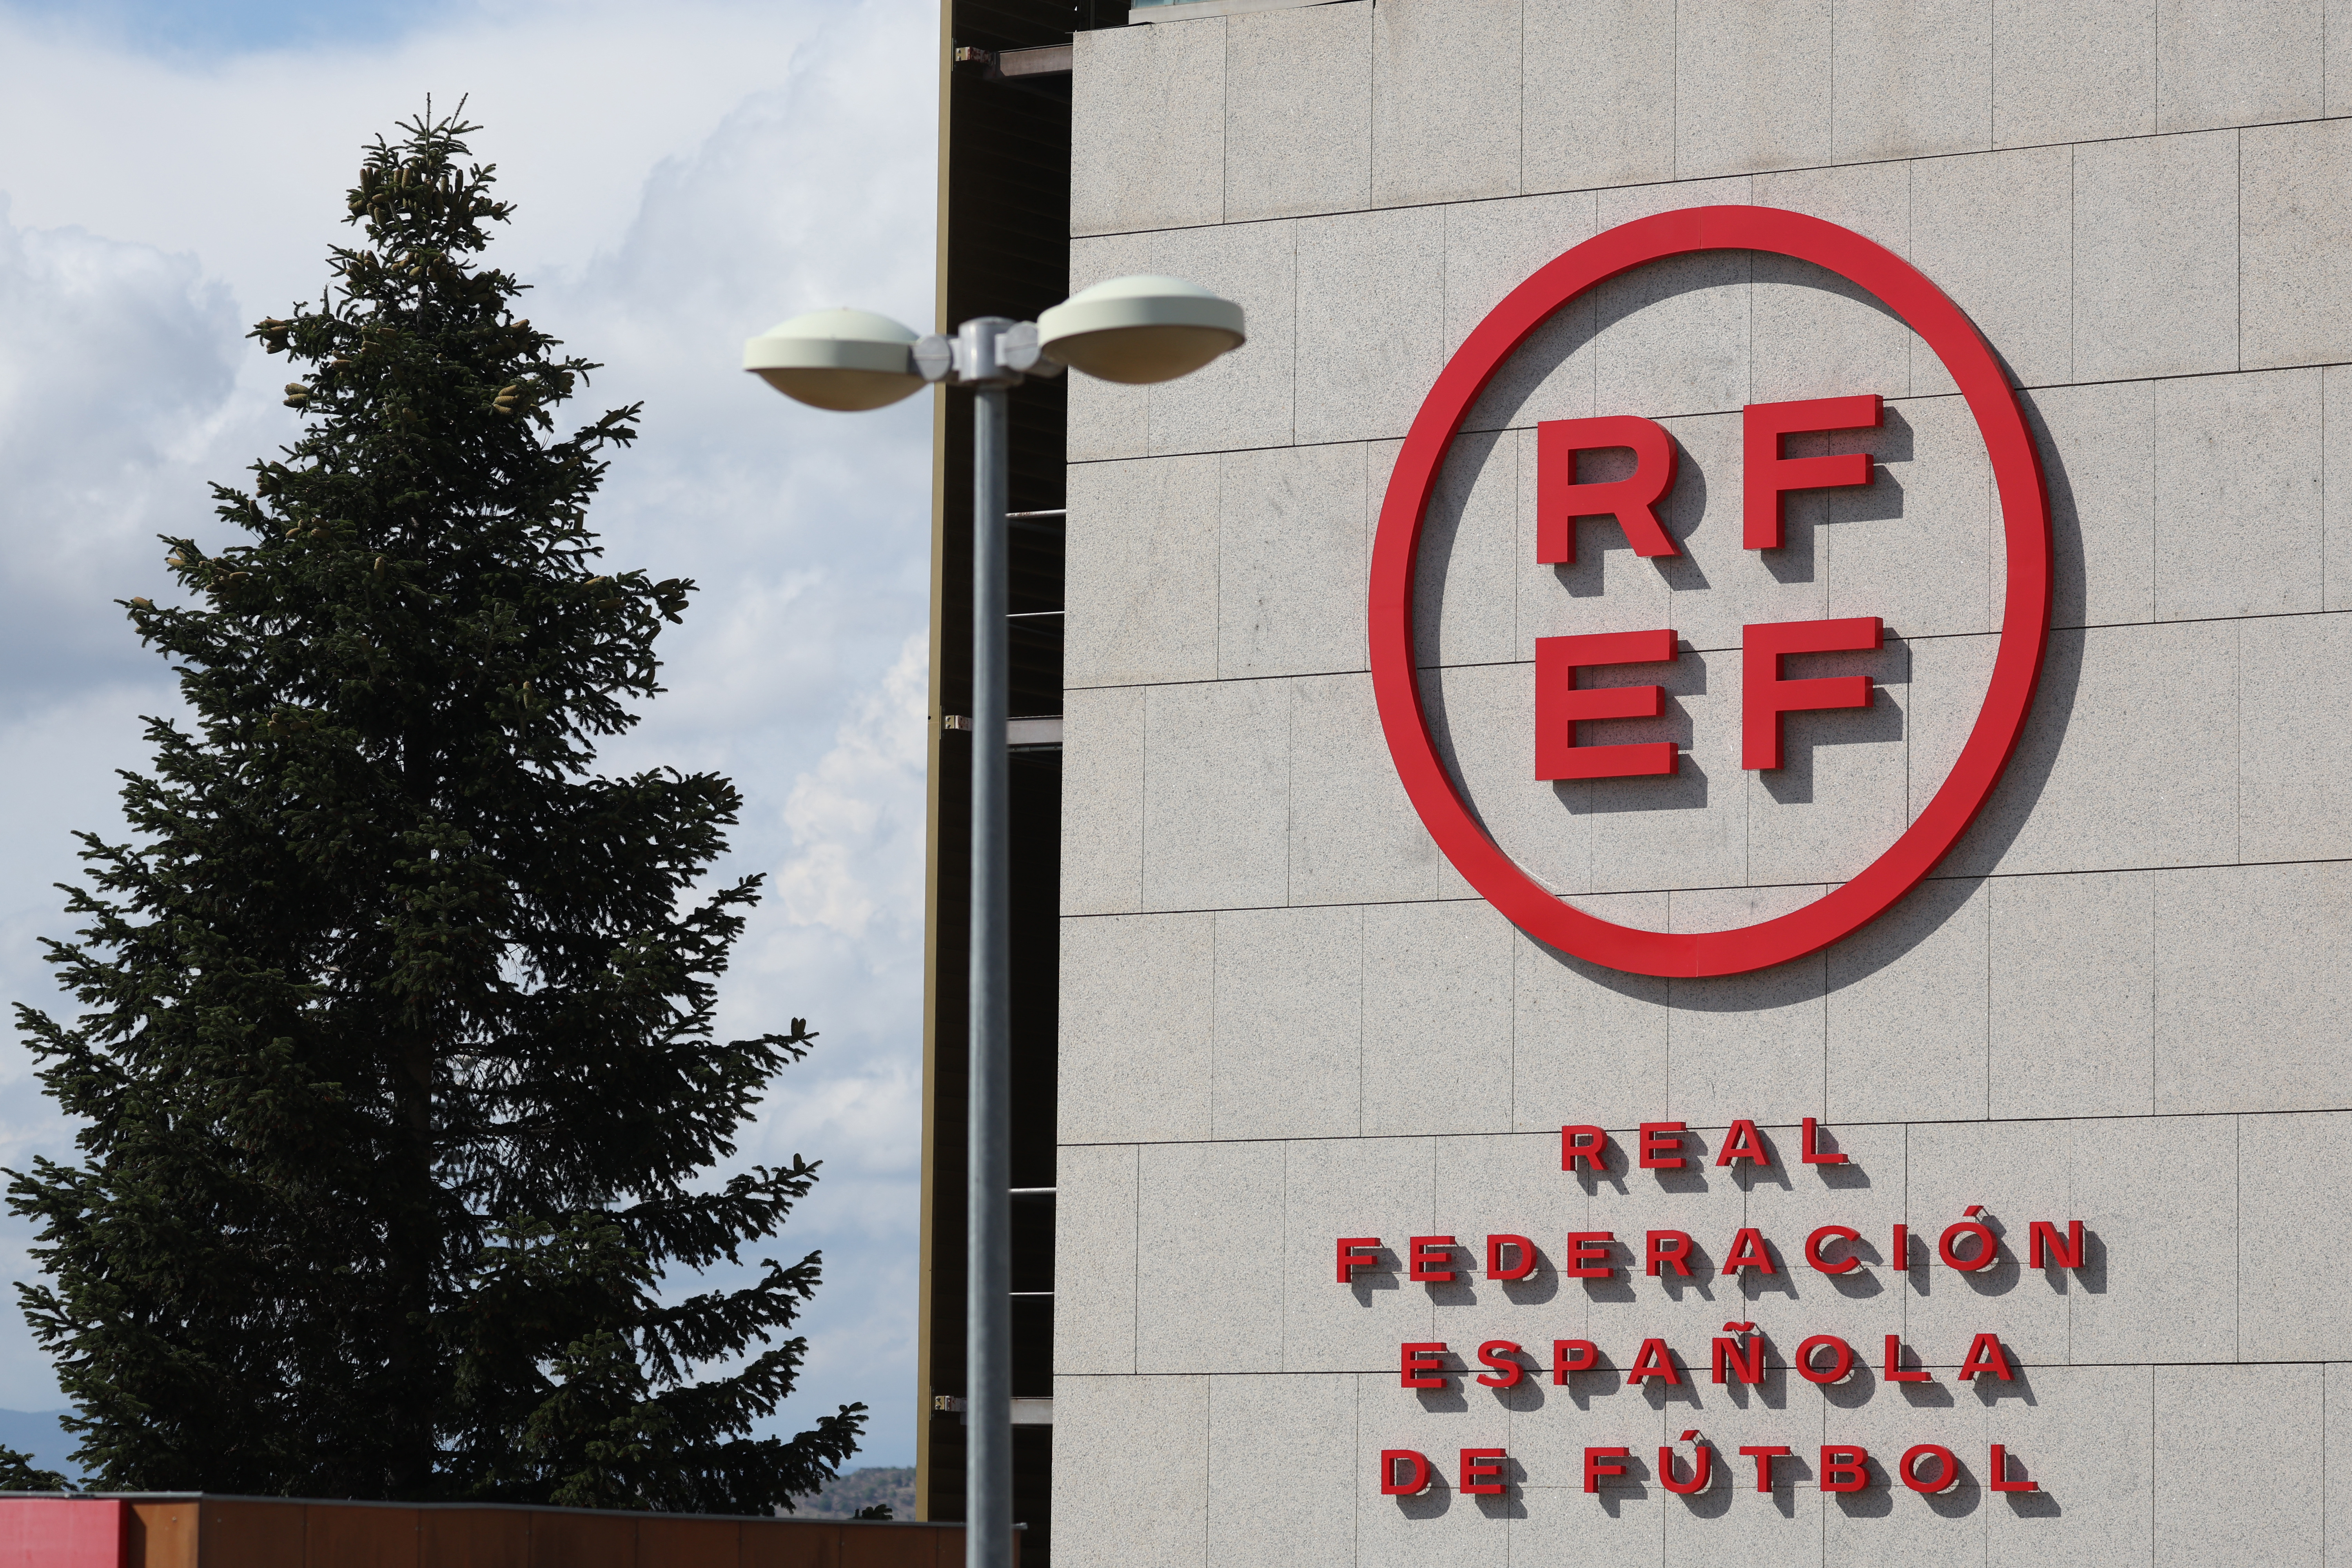 Spanish govt to oversee RFEF, raising concerns from FIFA, UEFA | Reuters